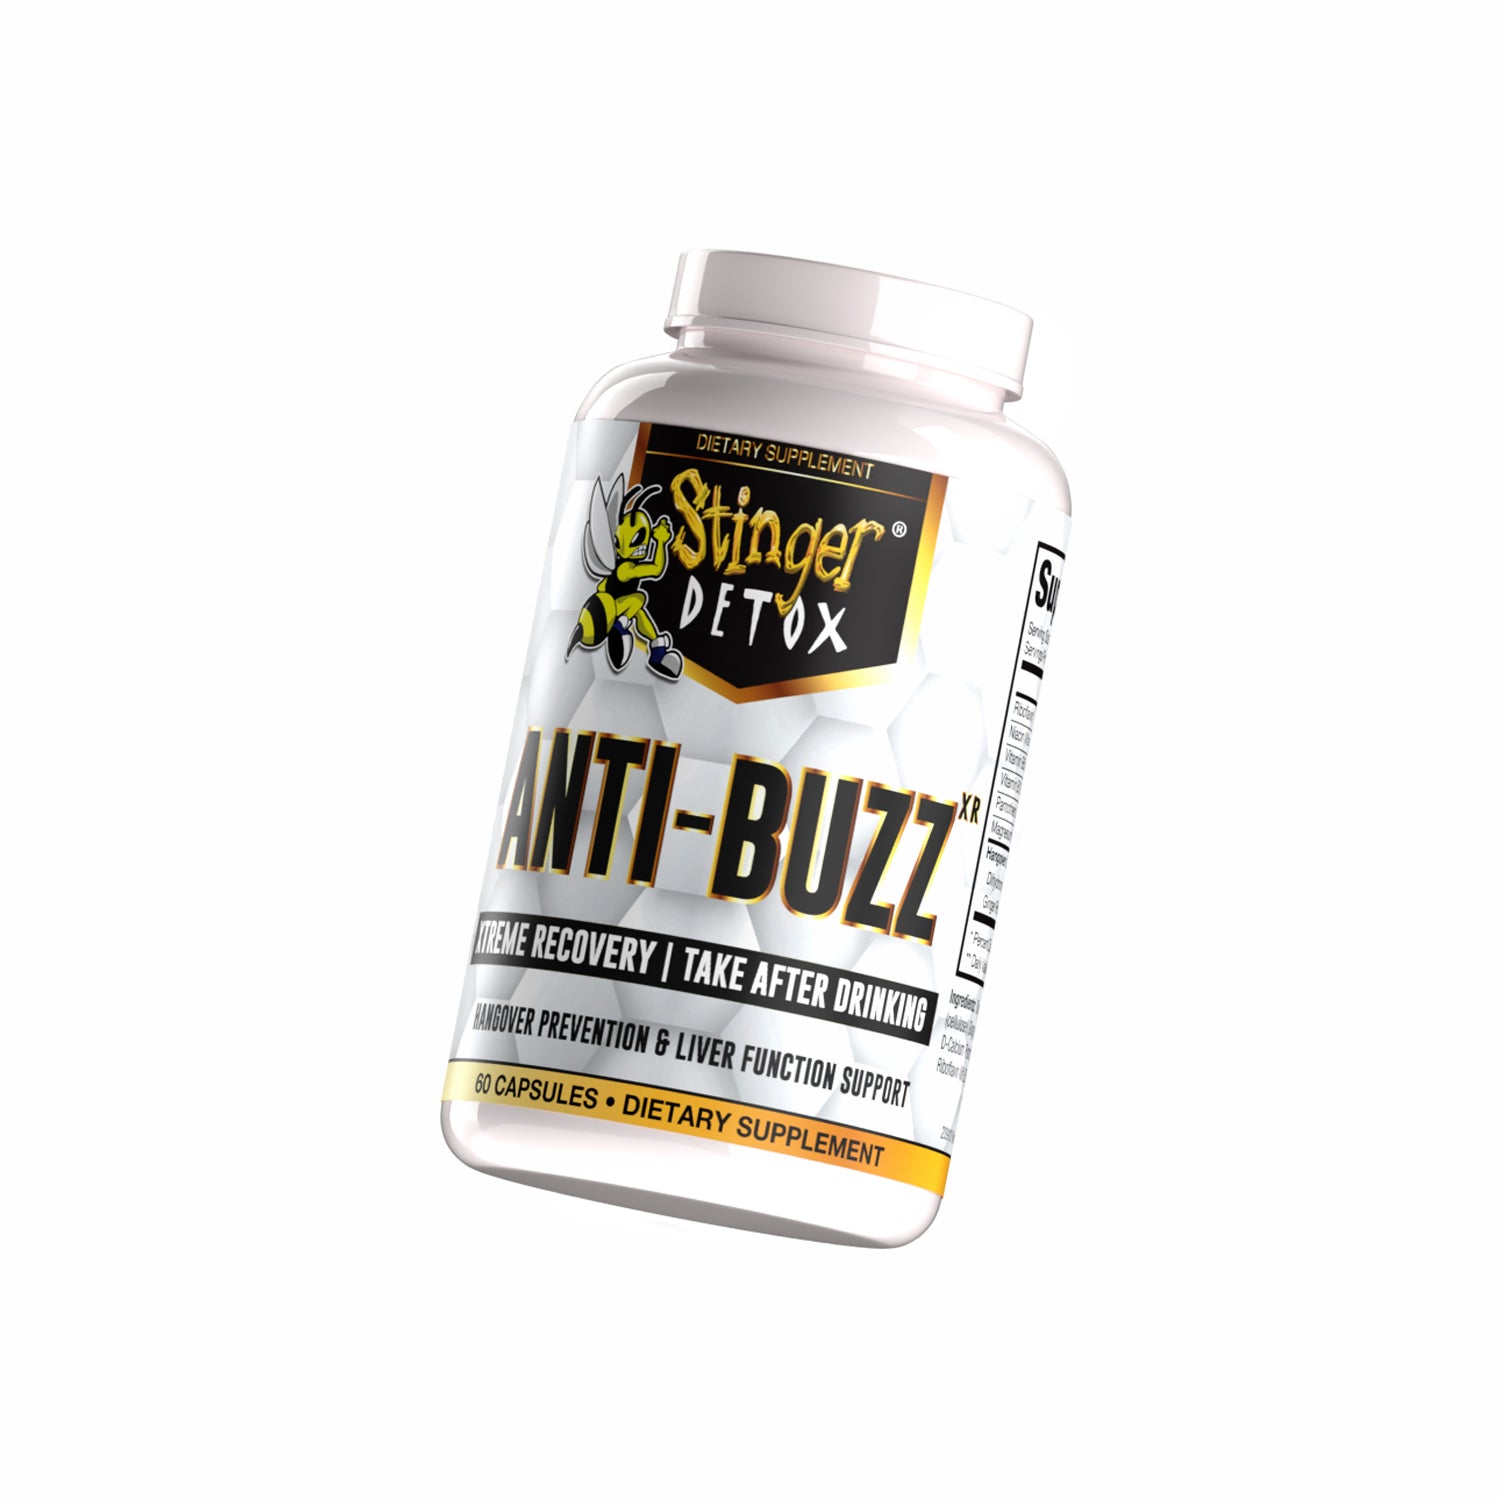 Anti-Buzz | Hangover Remedy & Liver Function Support